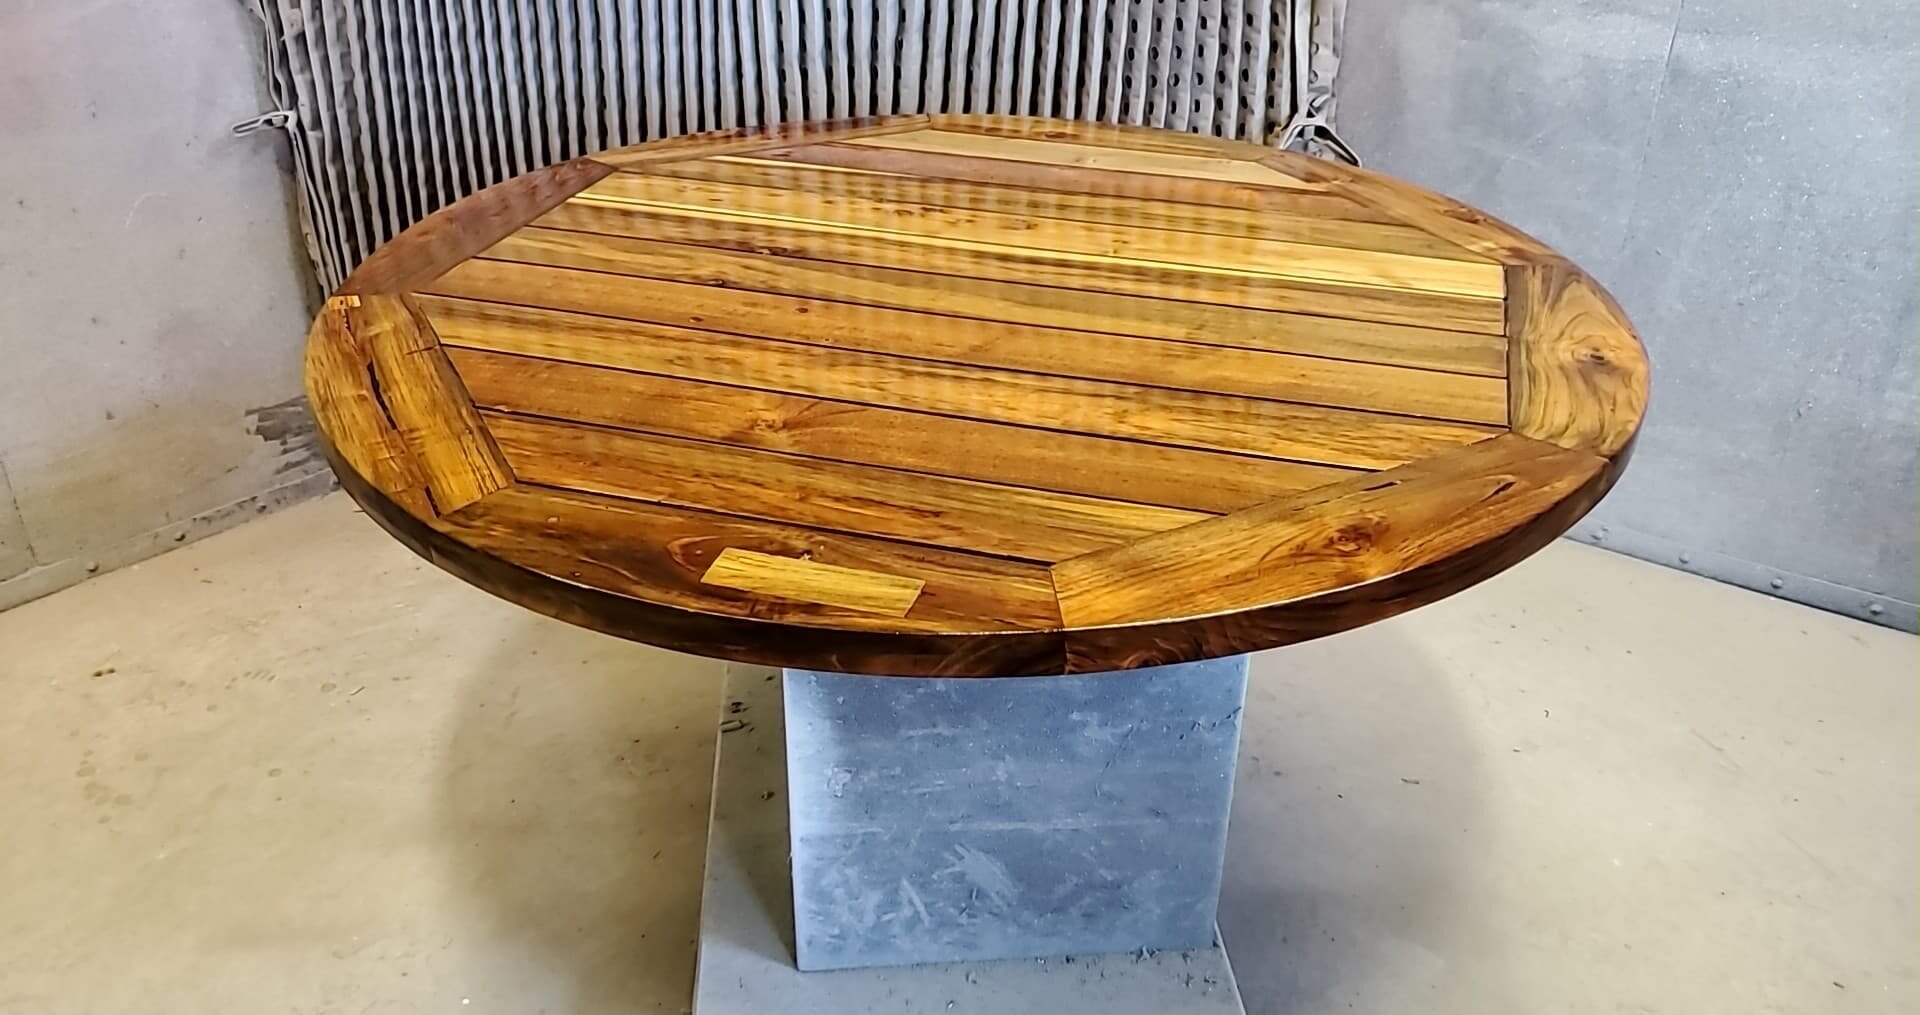 TUP TEAK outdoor table with marine varnish  AFTER  May 27 2021.jpg